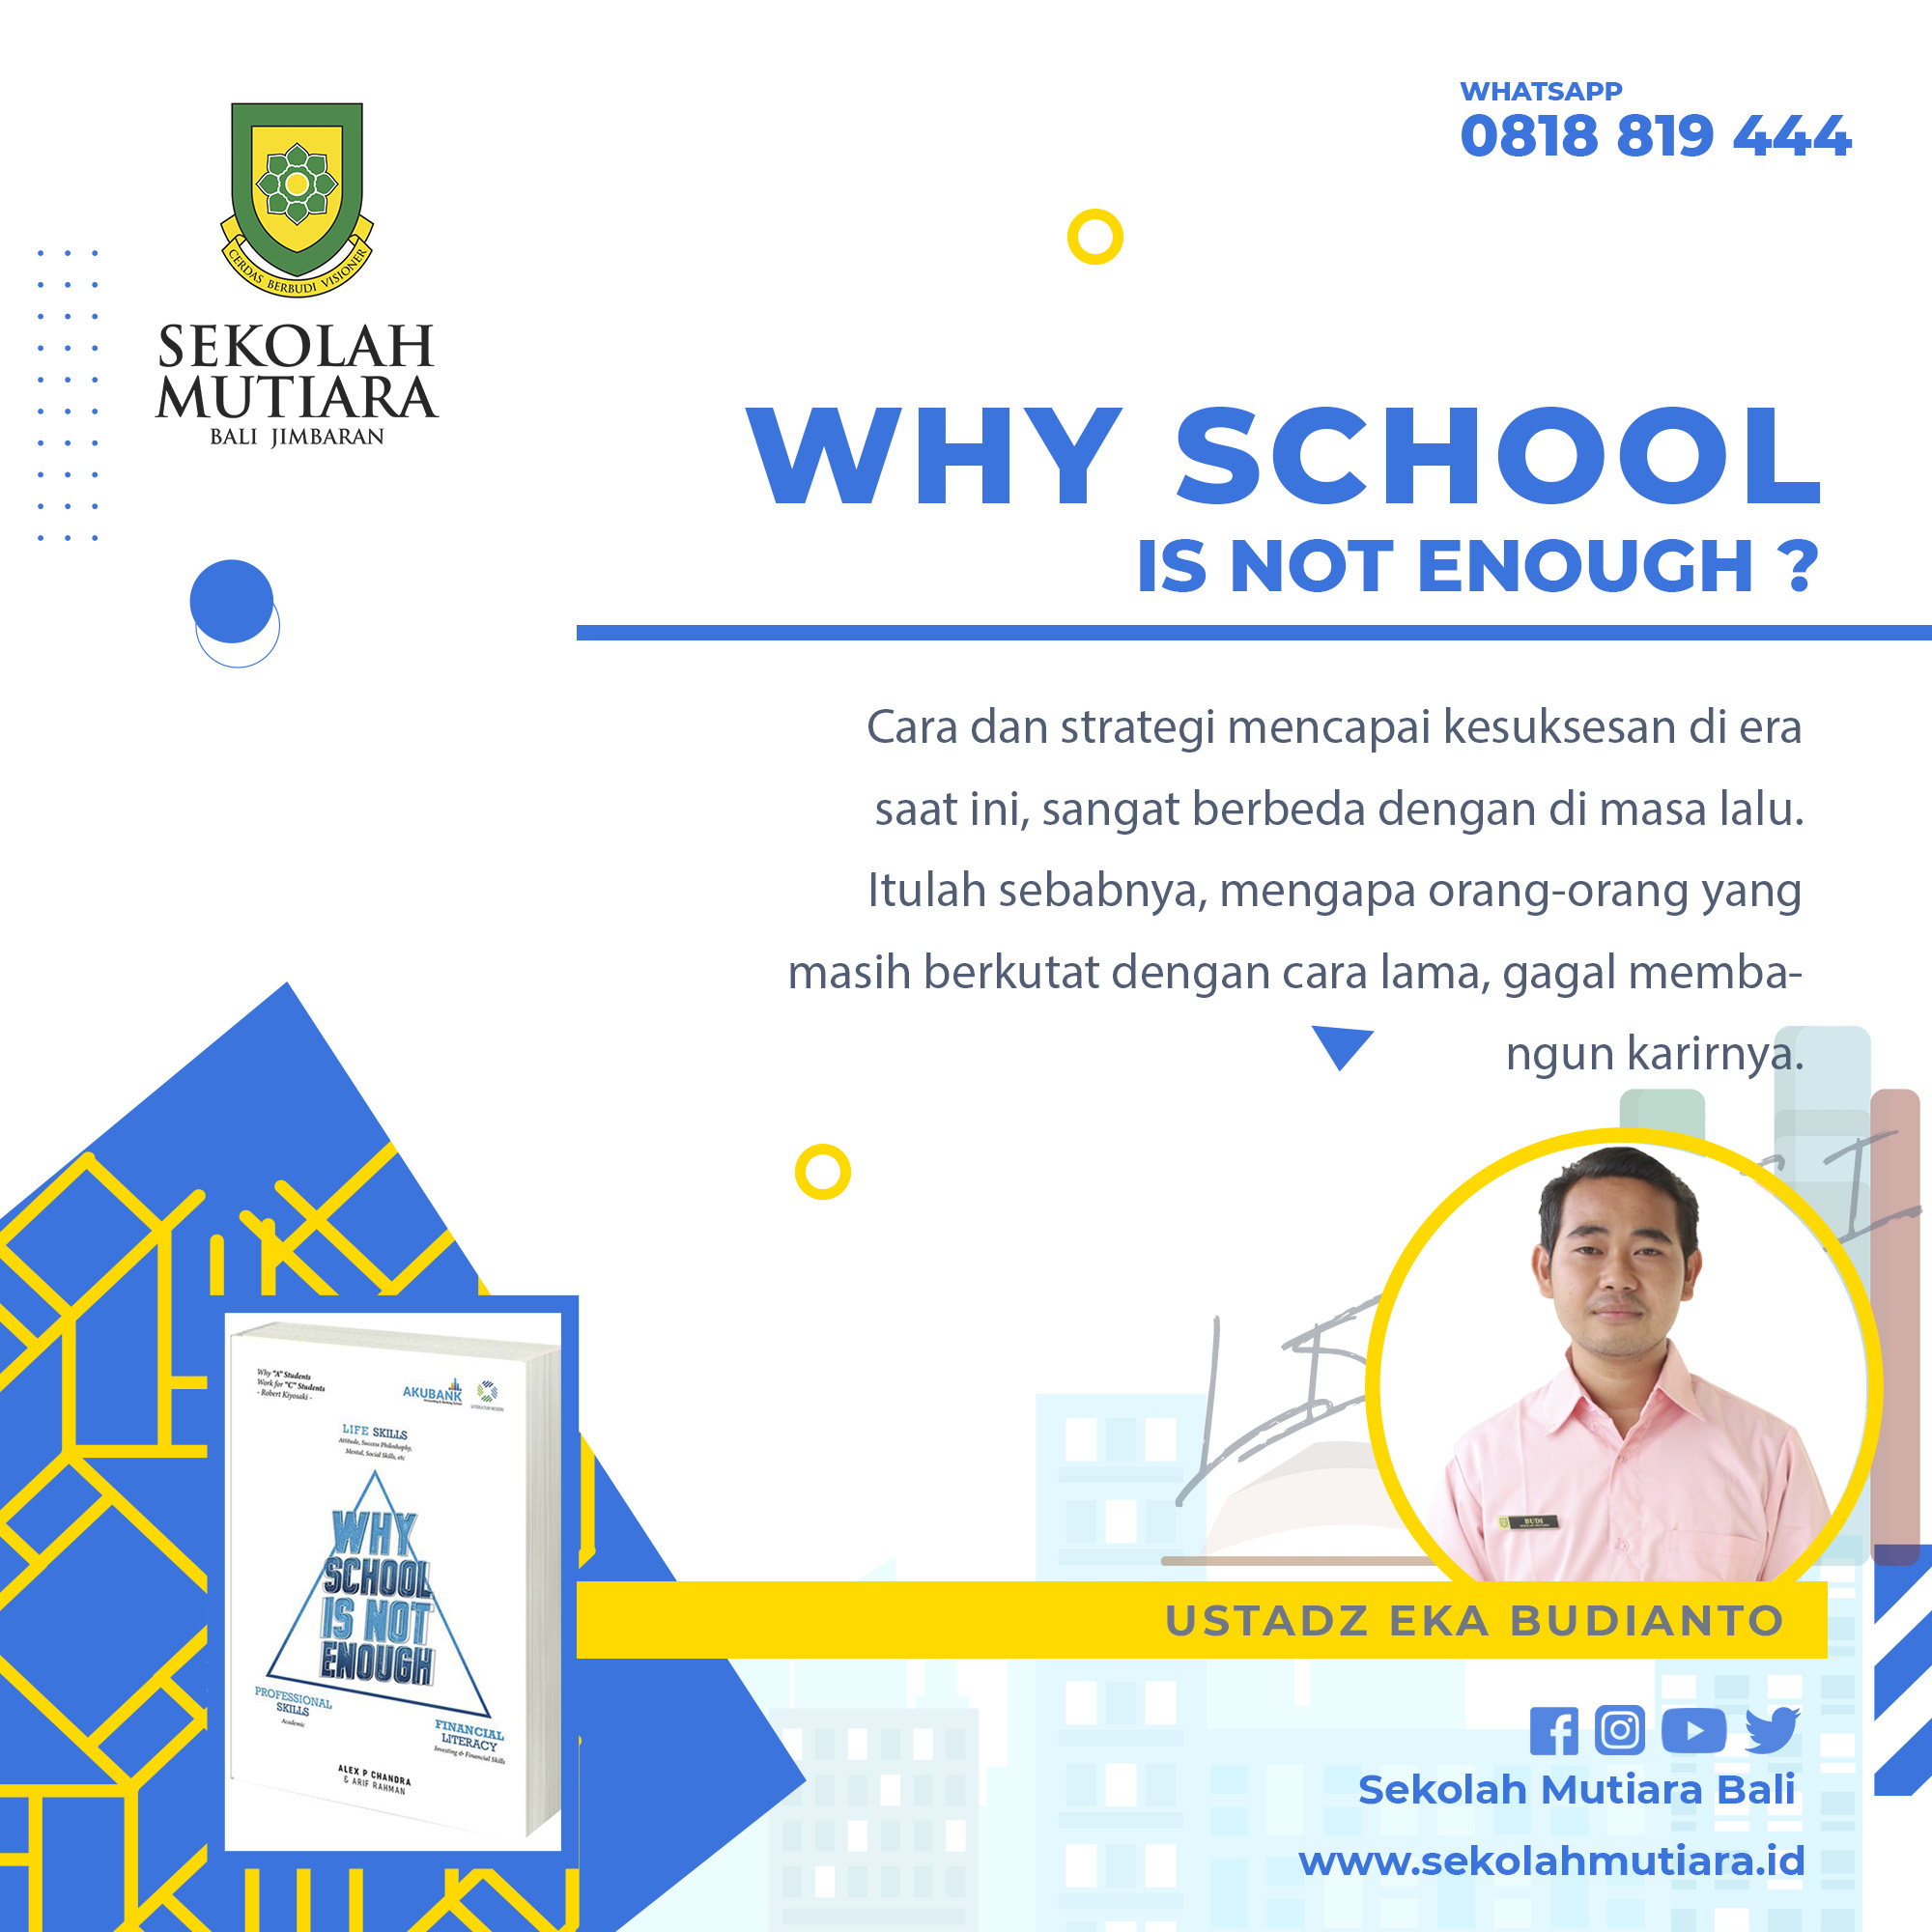 WHY SCHOOL IS NOT ENOUGH